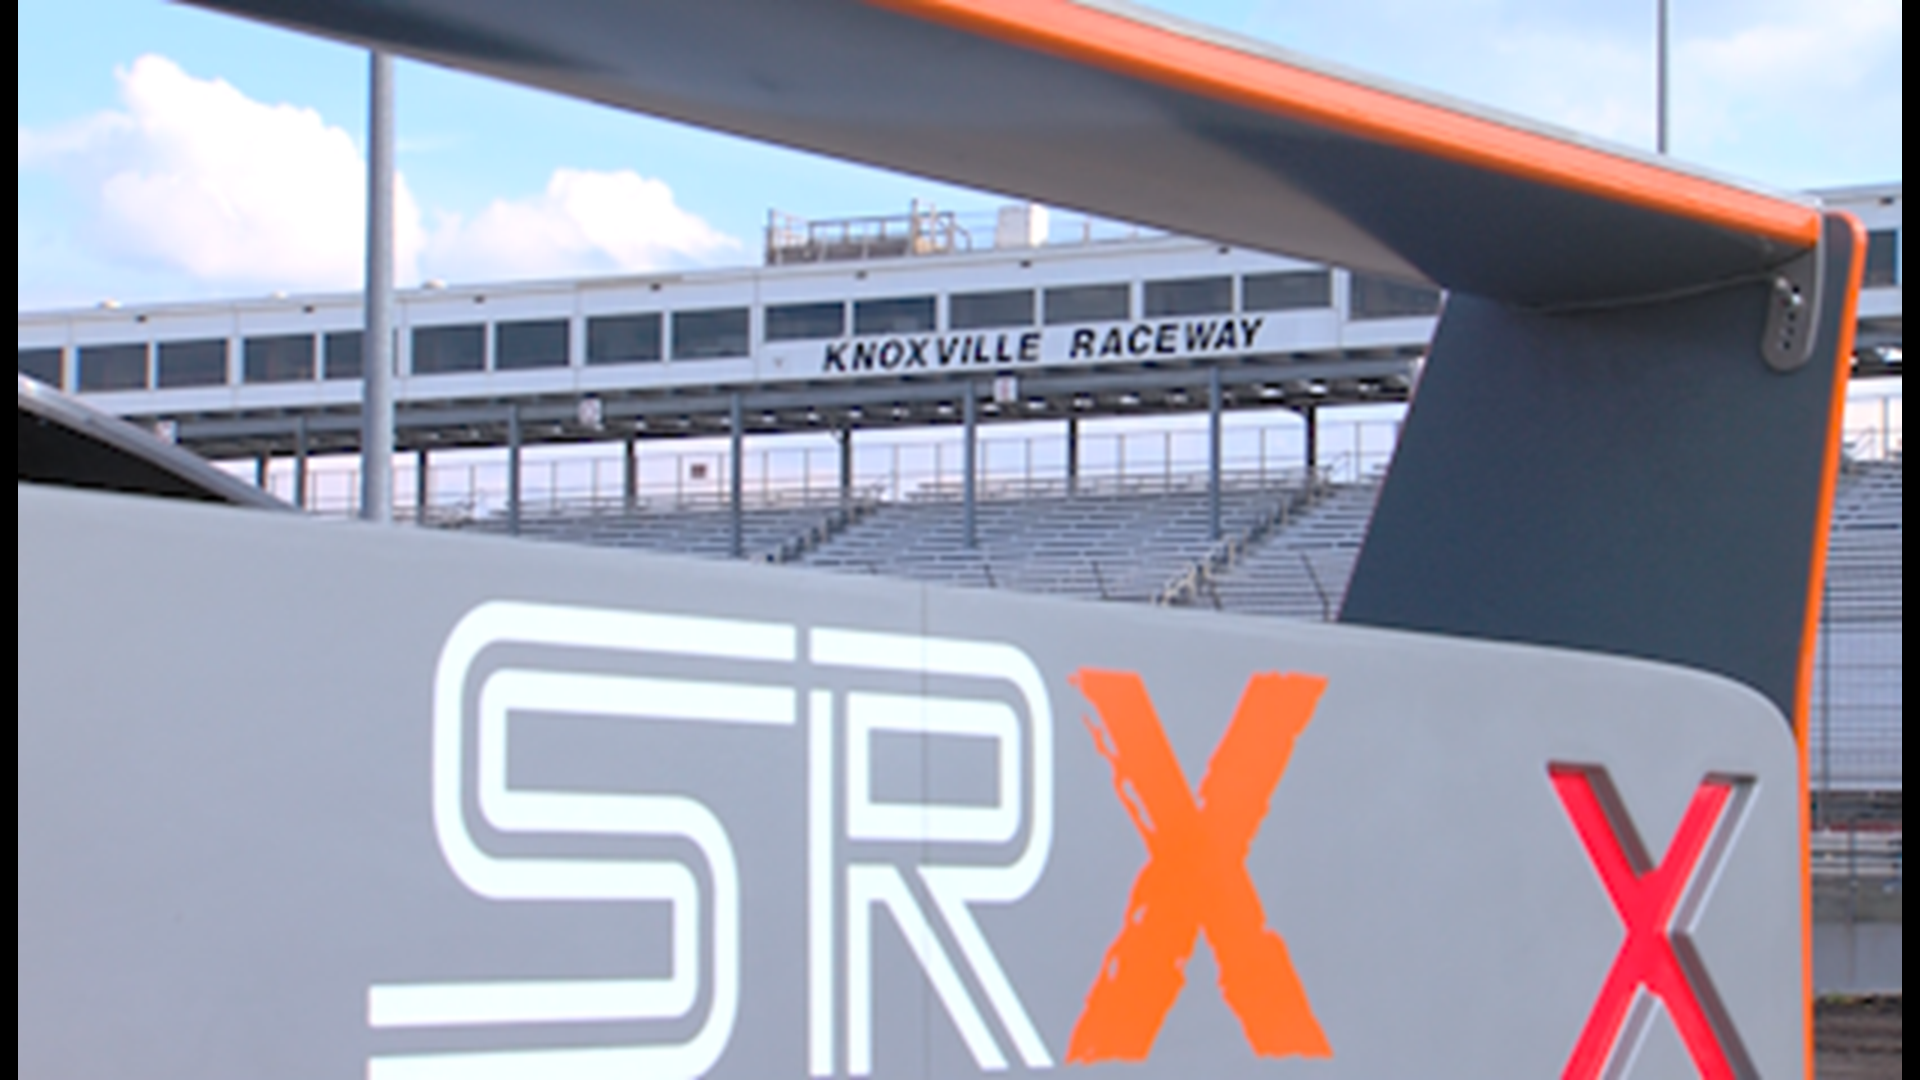 The SRX Series may be new, but they're hitting tracks that carry plenty of history. Monday, they tested their new car at Knoxville Raceway